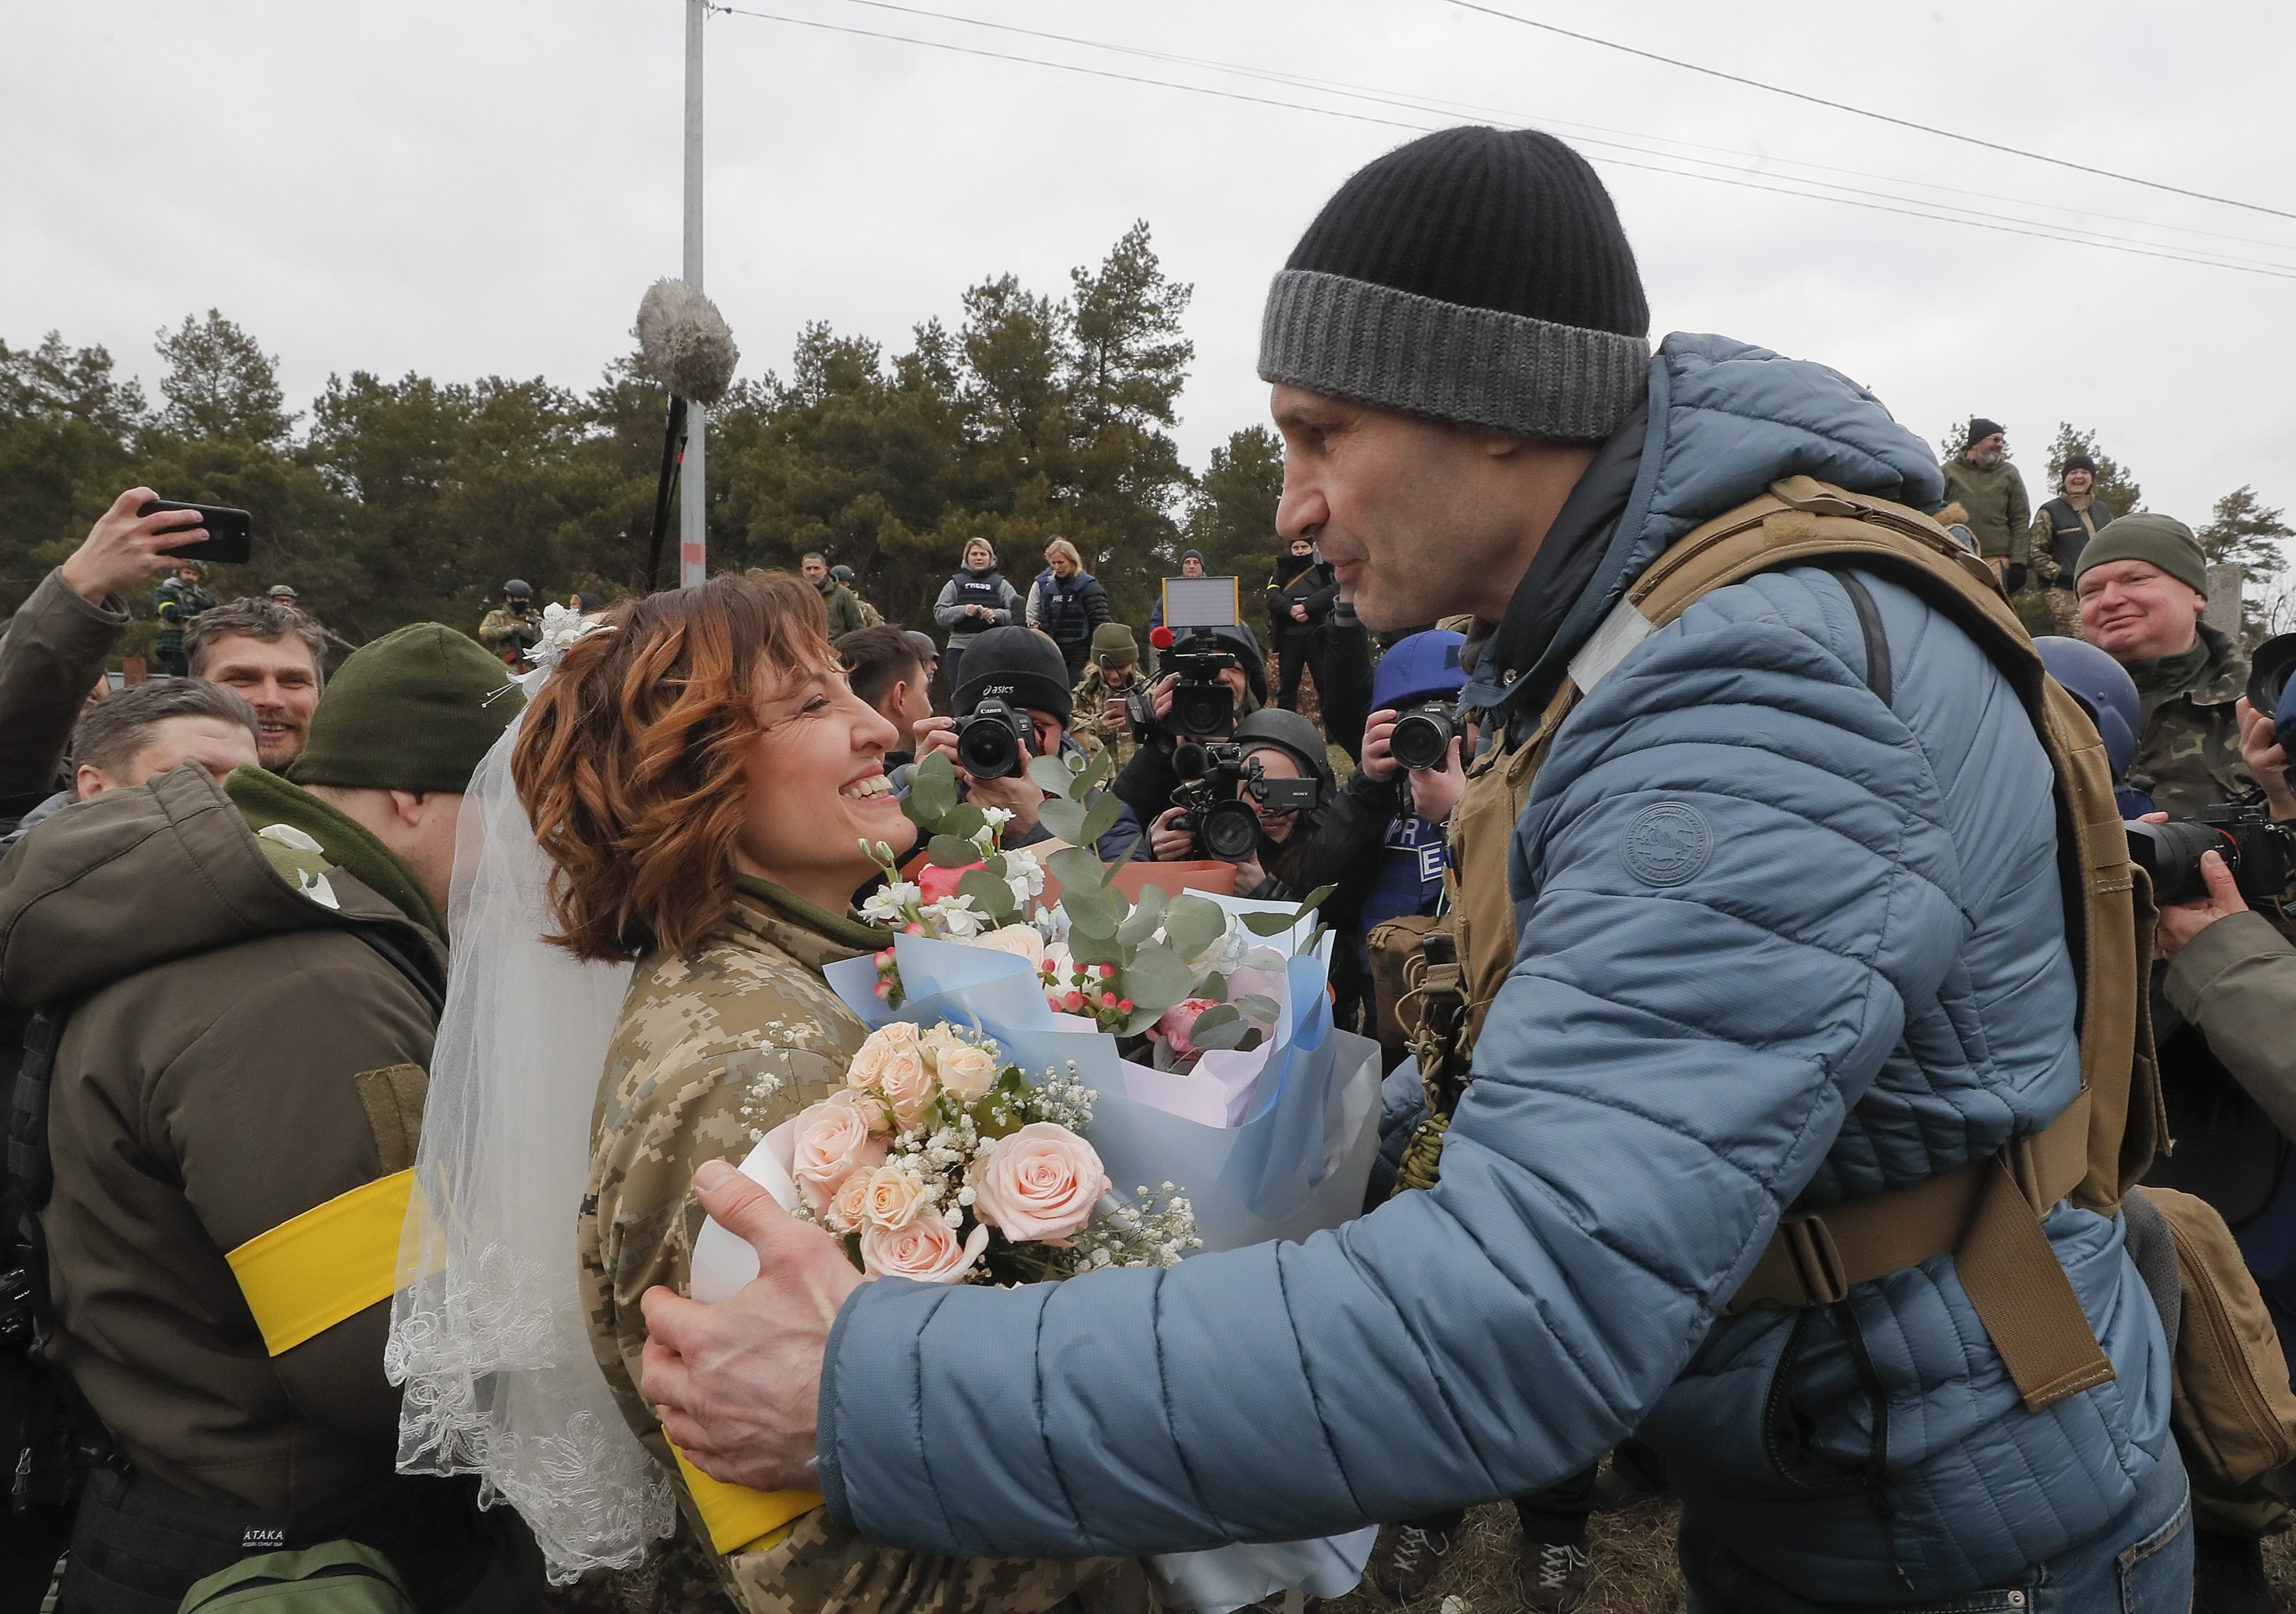 The pair tied the knot on the front line